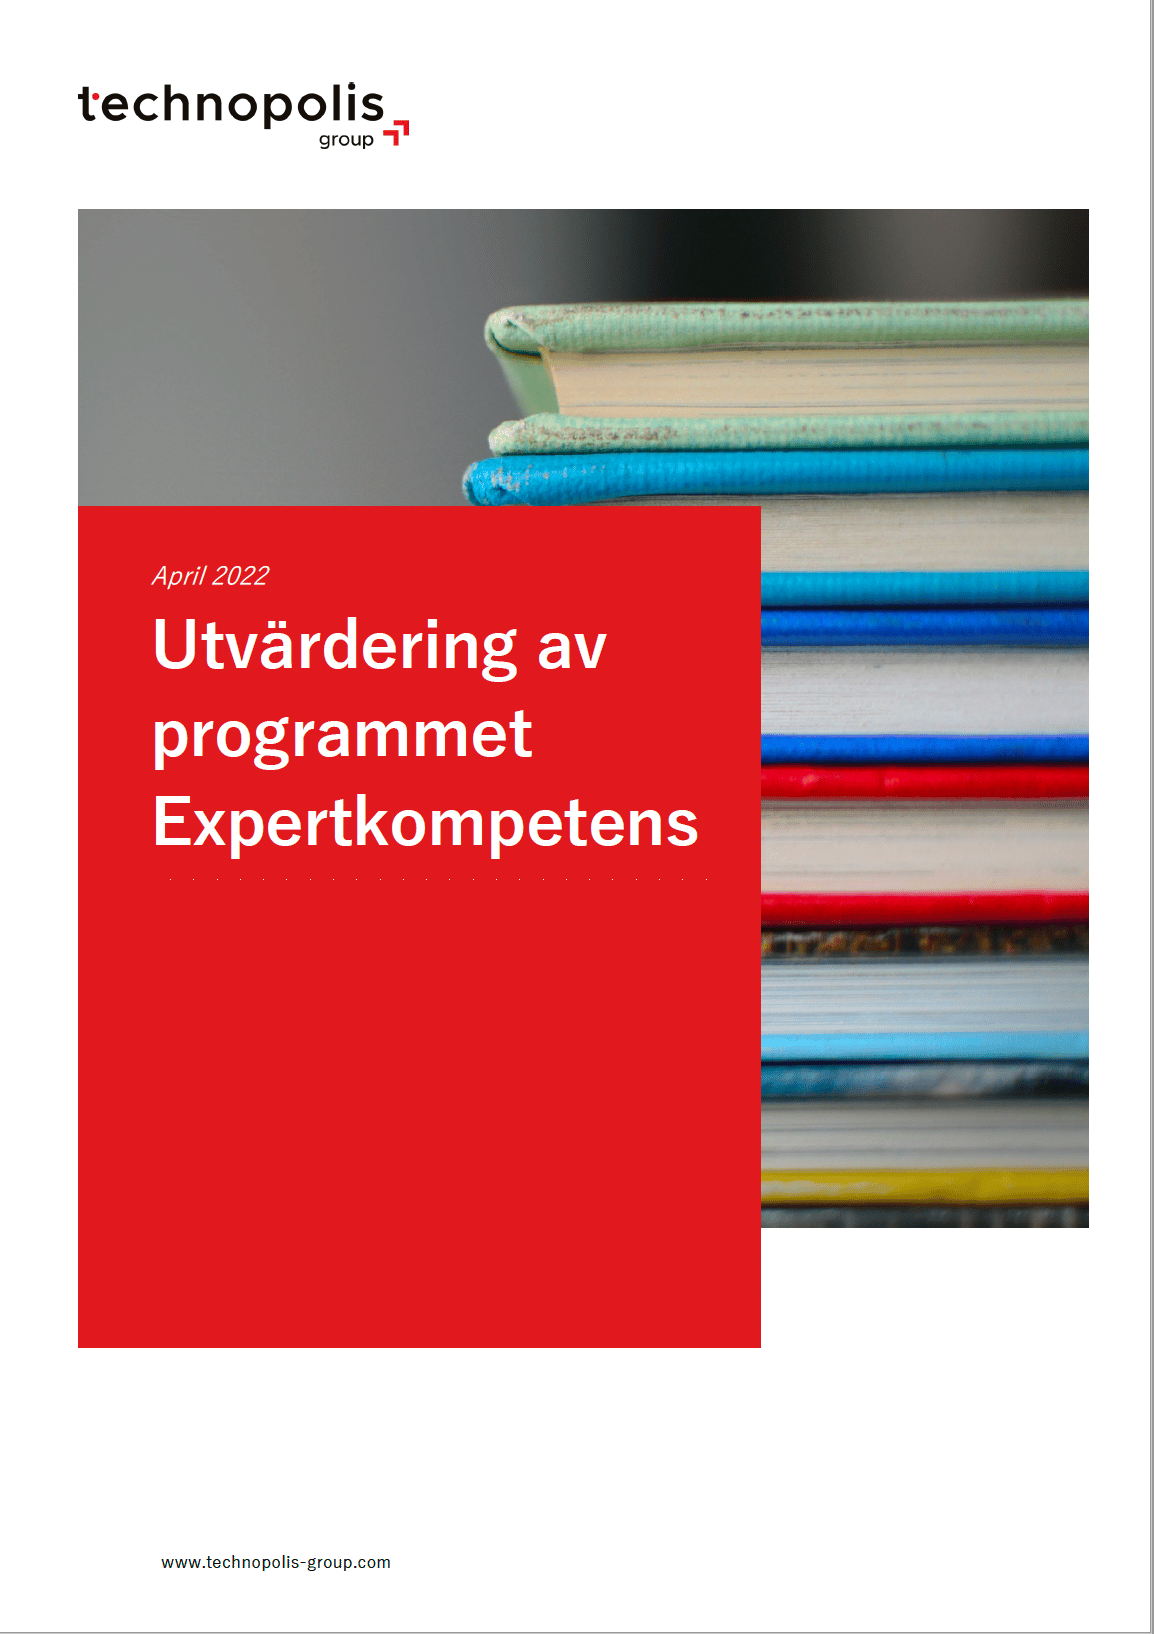 Evaluation of the Knowledge Foundation’s Programme Expertkompetens